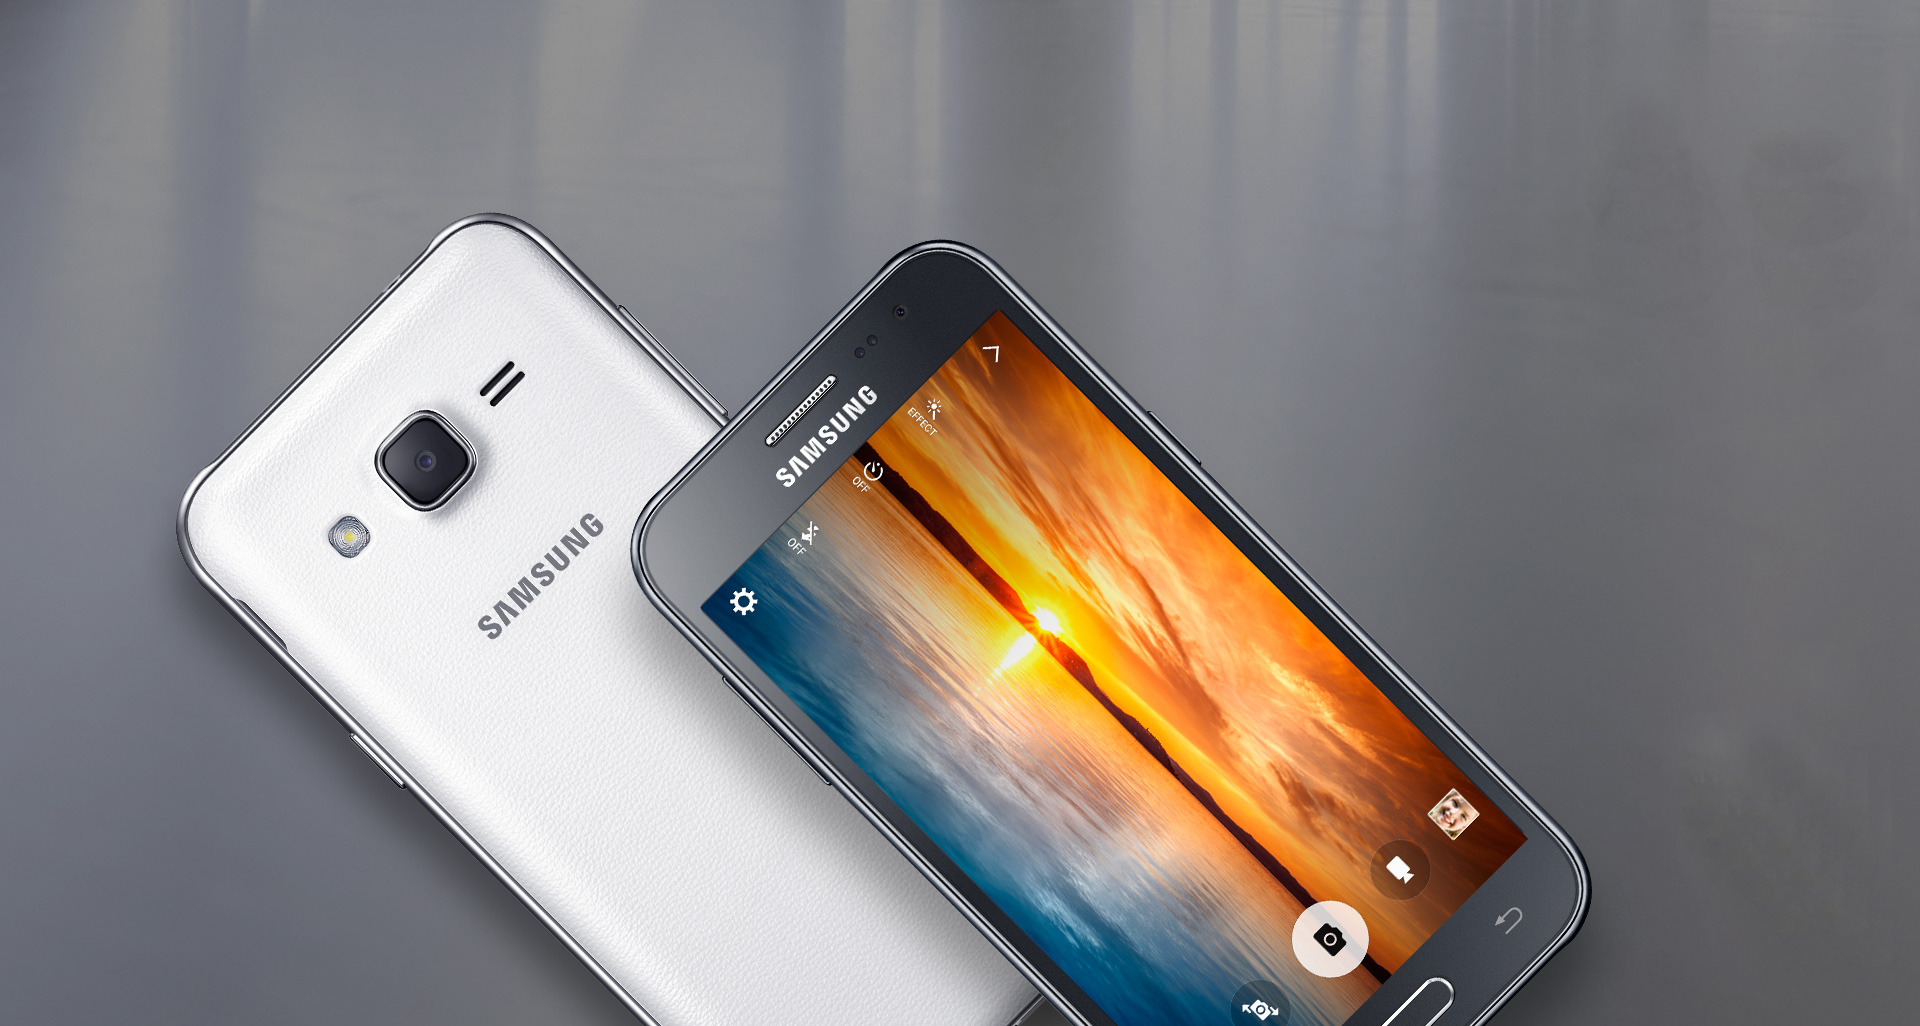 Samsung Galaxy J2 (2016) Specification, Price, Review, Pictures